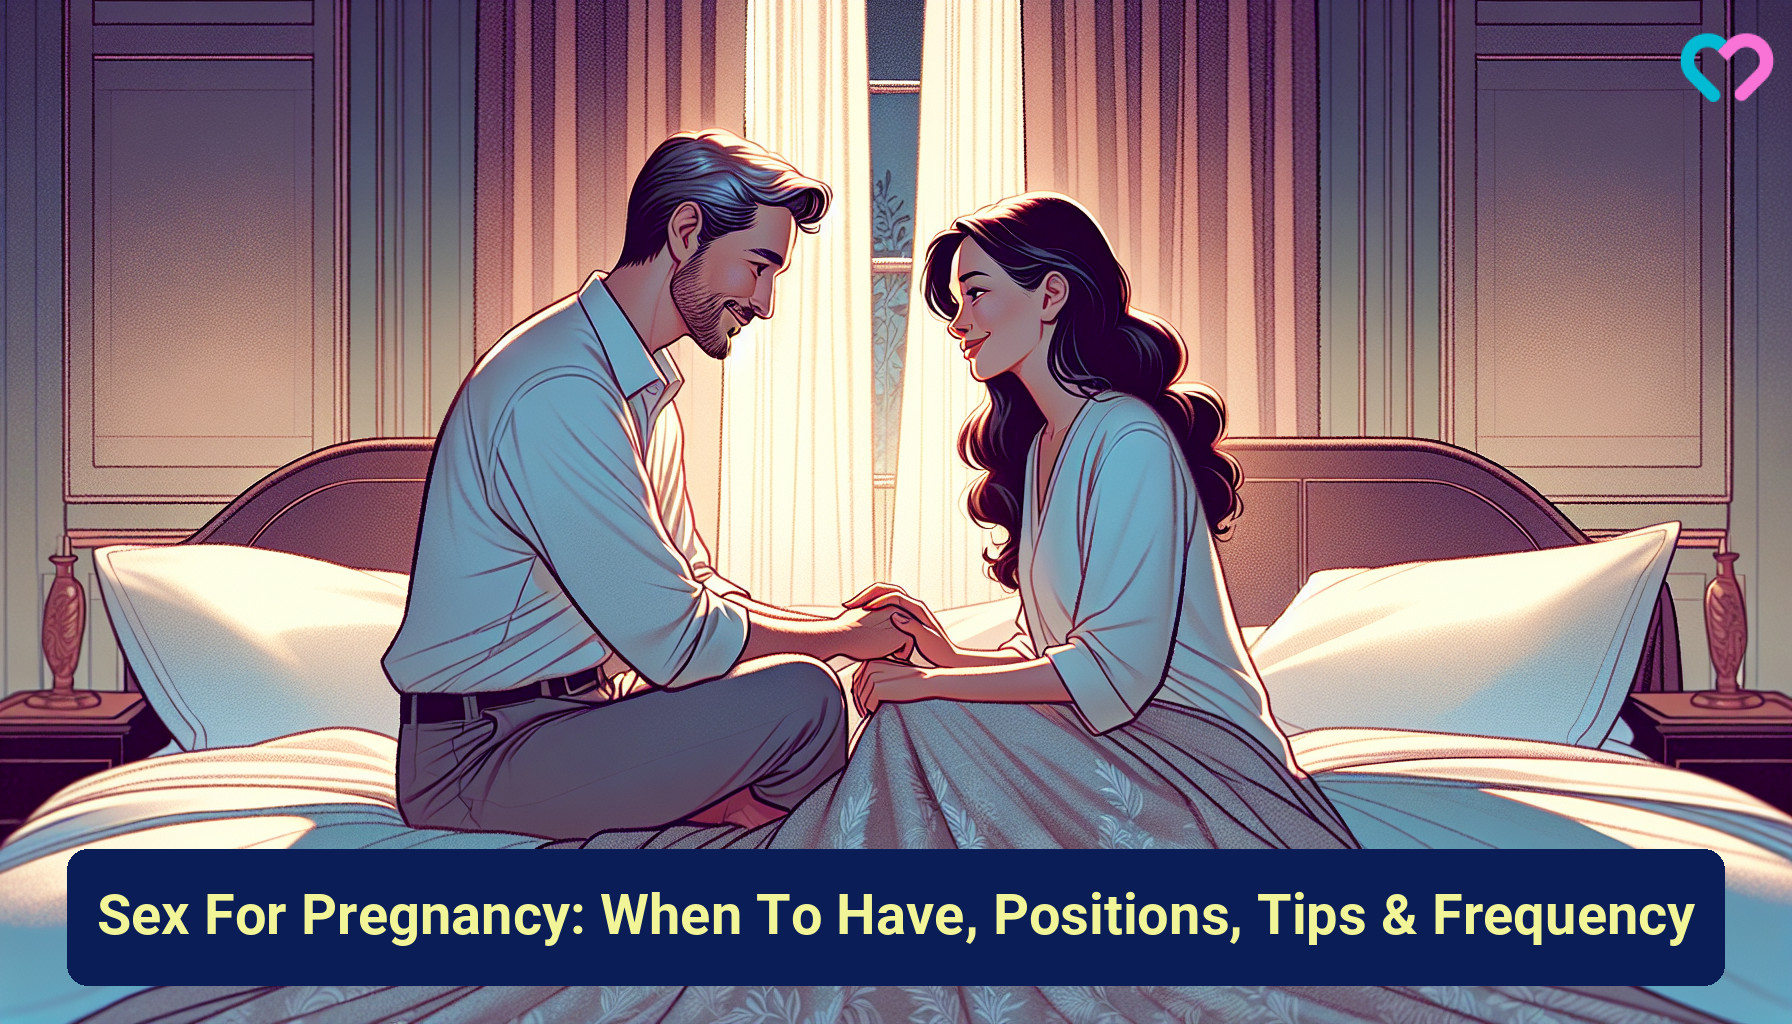 Sex For Pregnancy: When To Have, Positions, Tips & Frequency